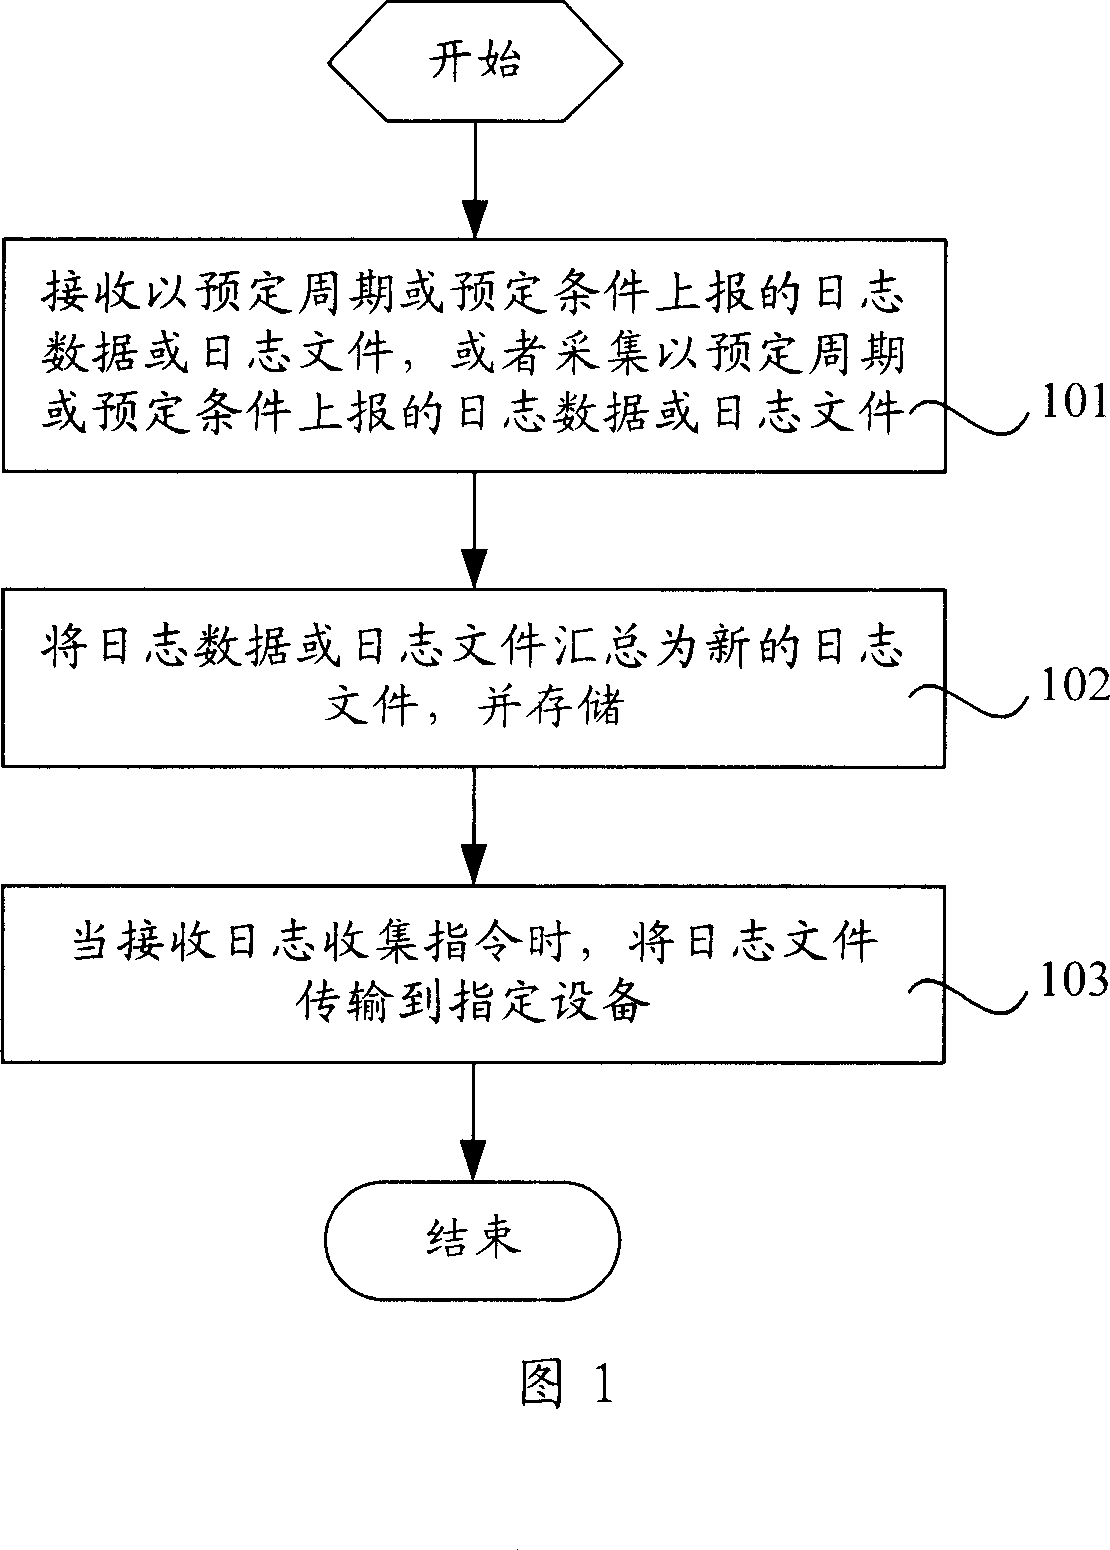 Distributed system journal collecting method and system